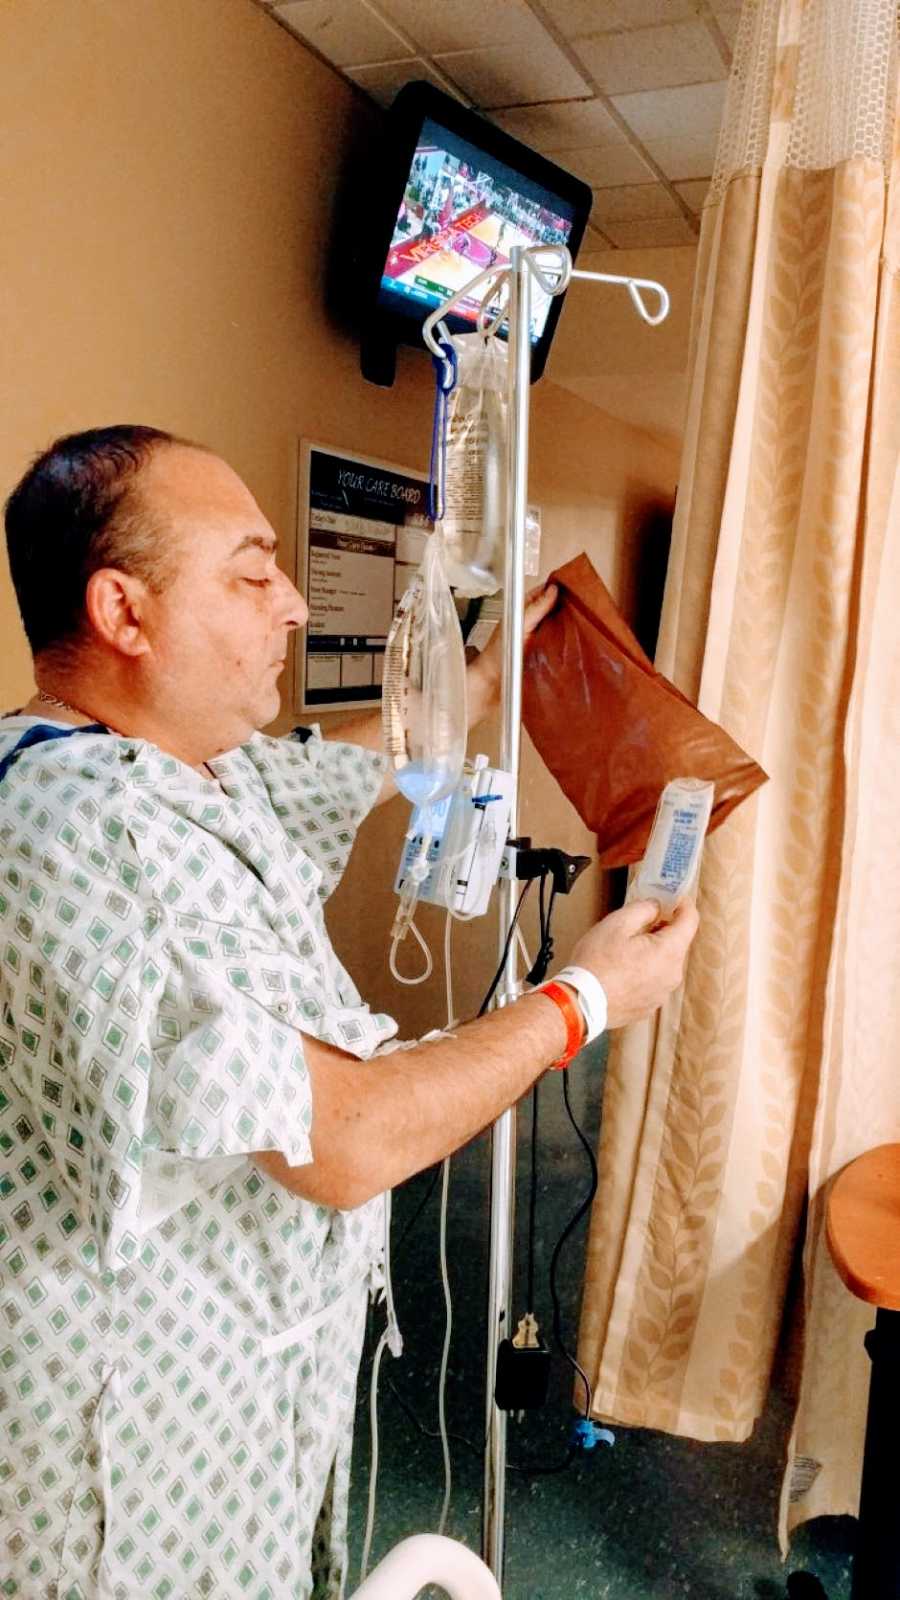 Man with Auto-Brewery Syndrome gets attached to IV bags during testing